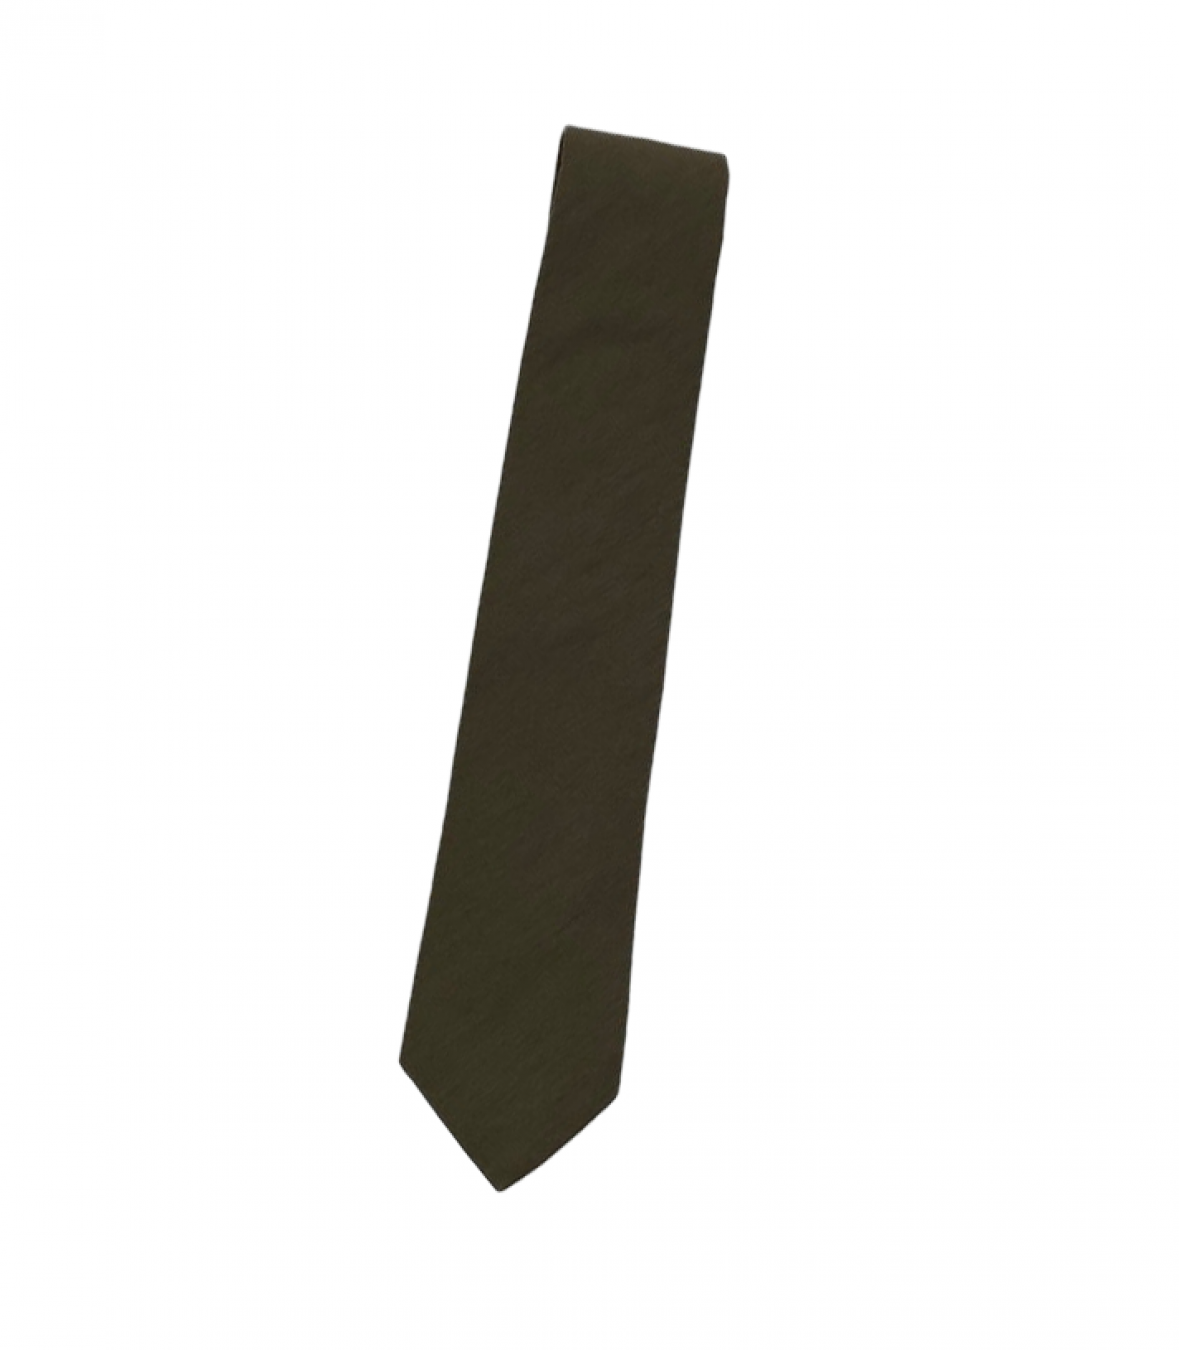 Wool Jersey Knit Tie Made in USA | RAMBLERS WAY